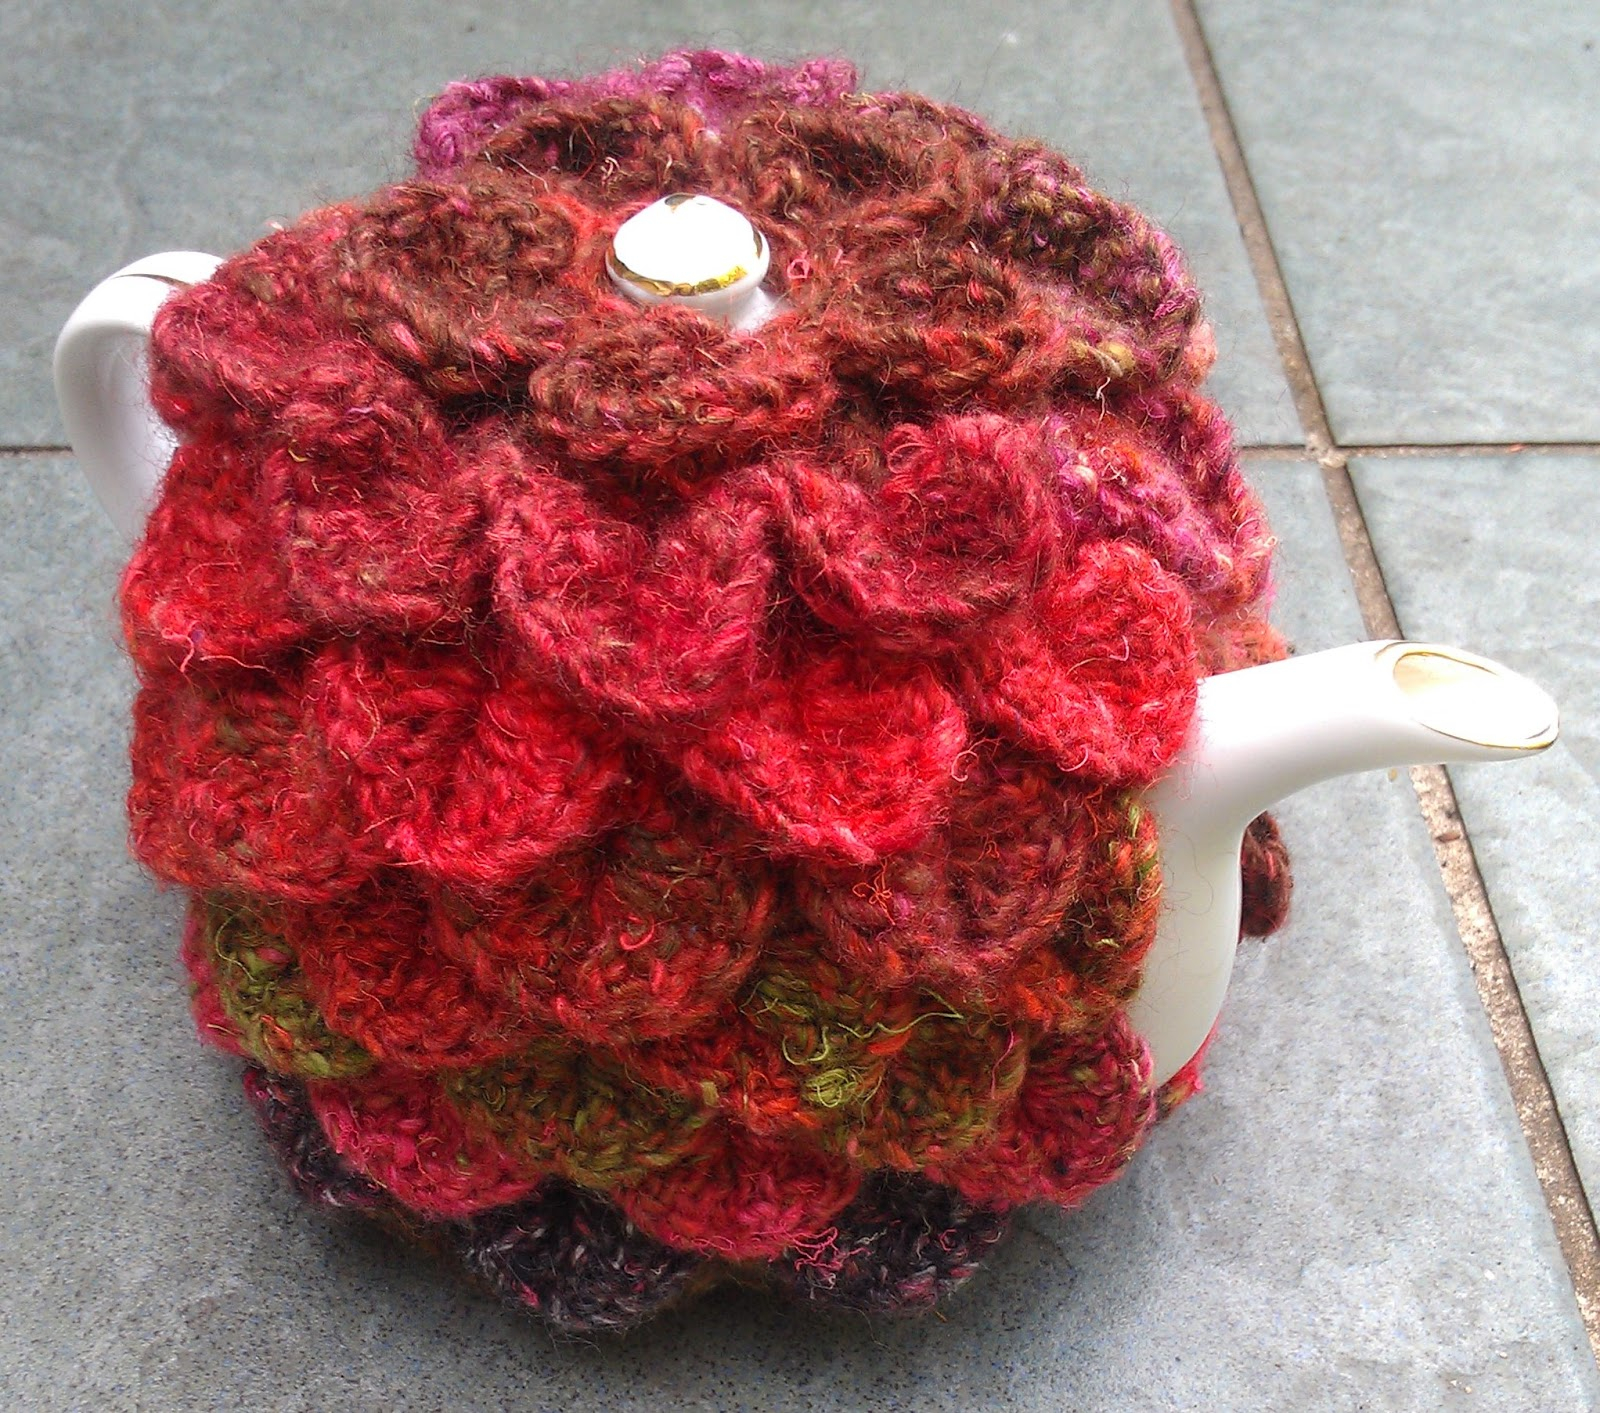 Patterns For Knitted Tea Cosies Craft A Cure For Cancer Free Tea Cosy Patterns